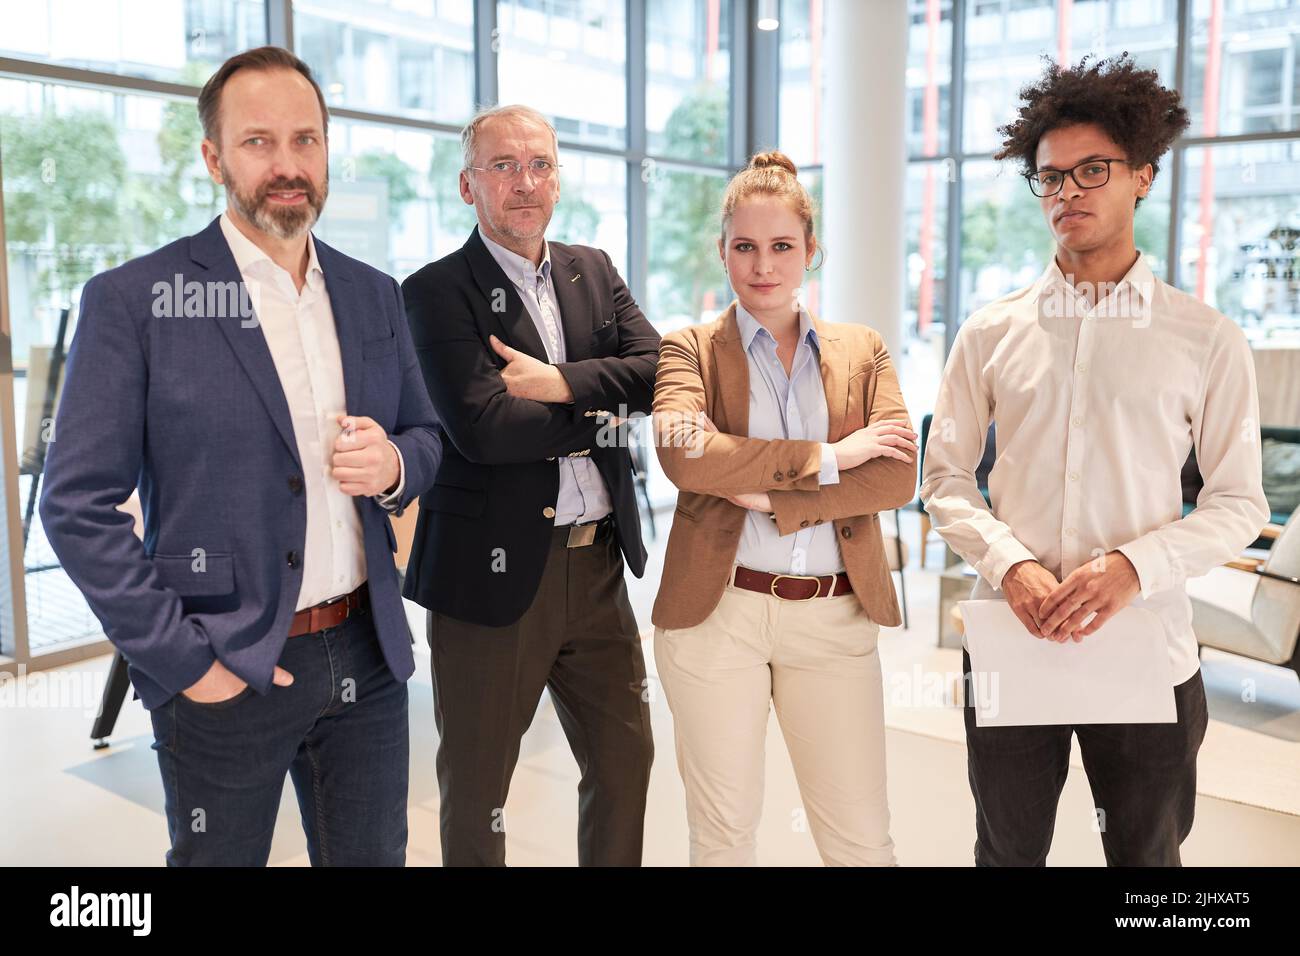 Successful and competent business team with managers and trainees in the office Stock Photo